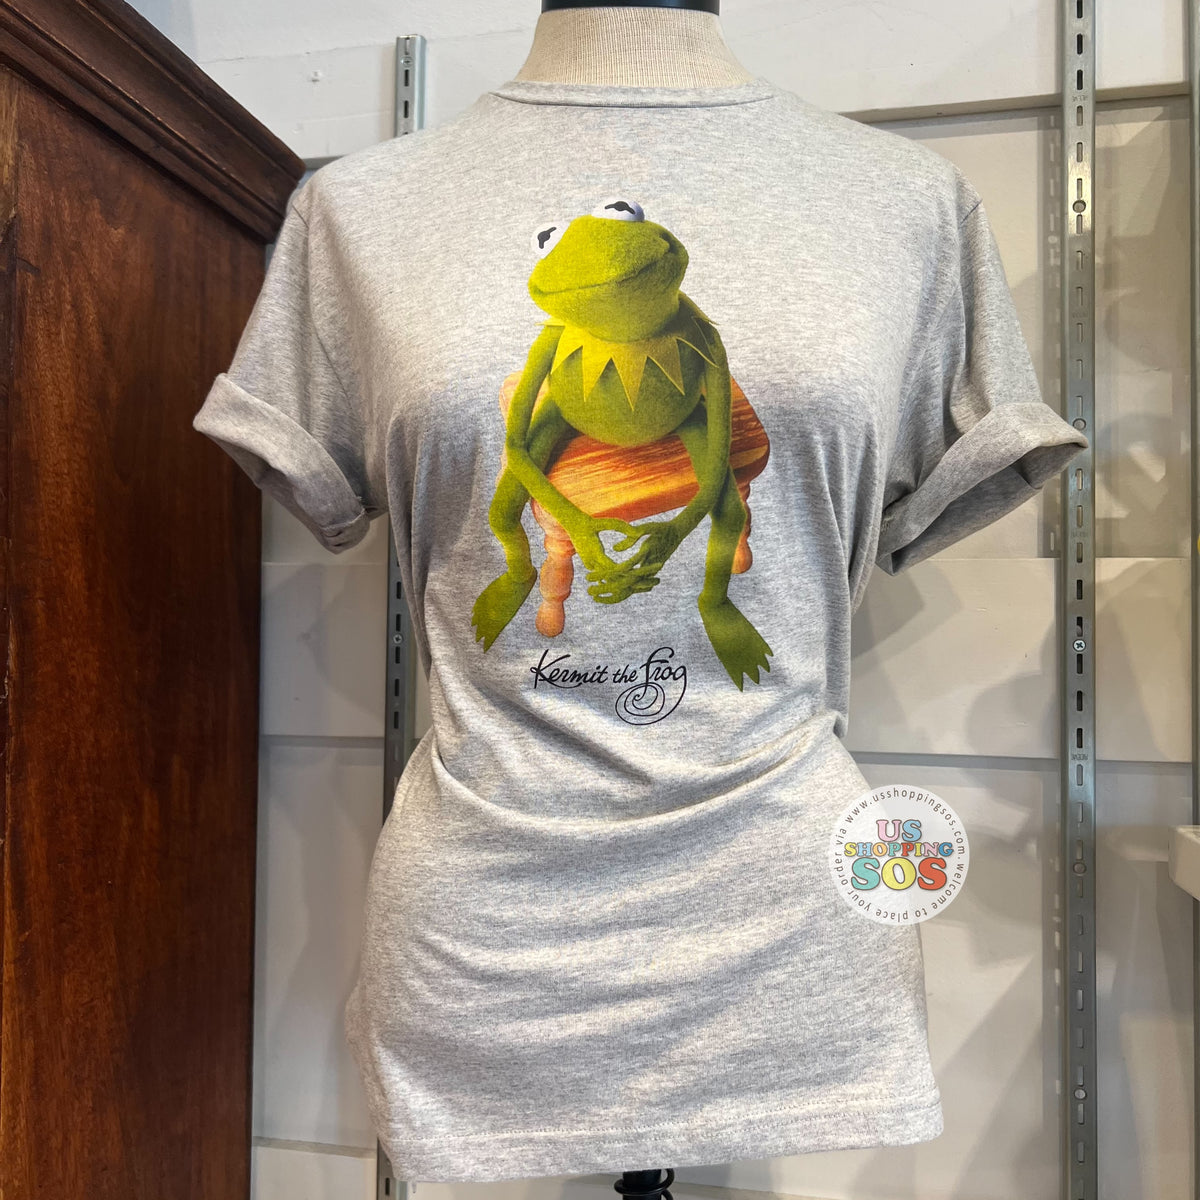 (Adult) Graphic Grey - Heather USShoppingSOS T-shirt — Frog the Muppets Kermit DLR The